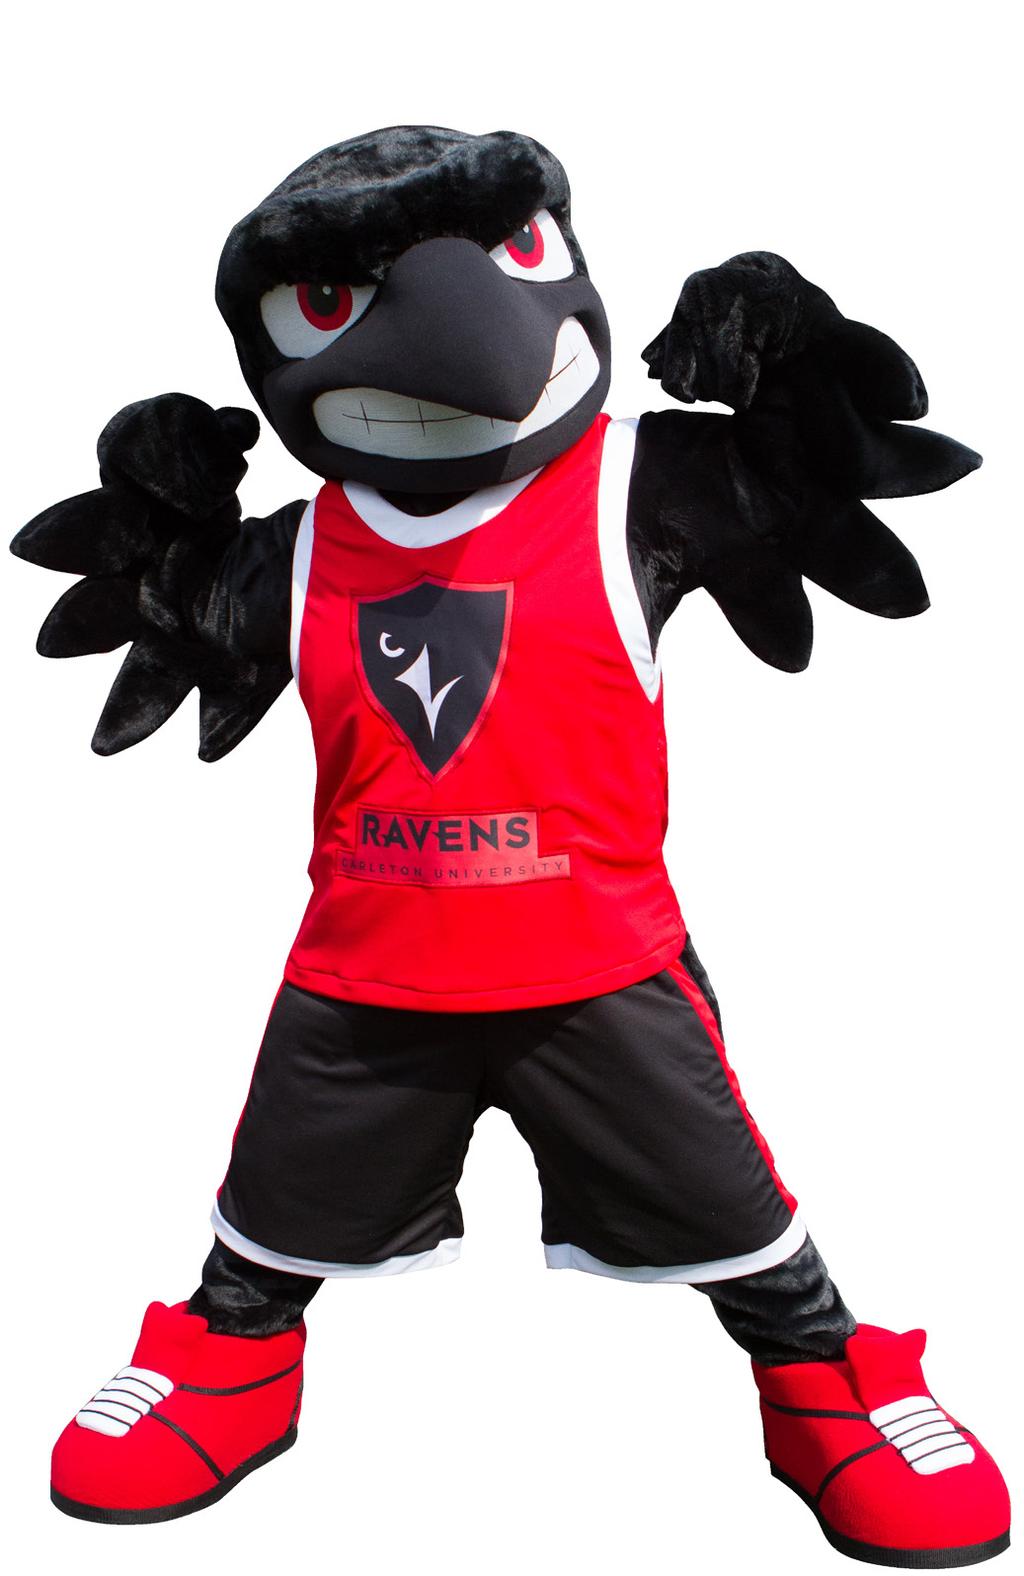 WELCOME TO RAVENS SPECIALTY CAMPS! Welcome to the Carleton Ravens specialty camp program.